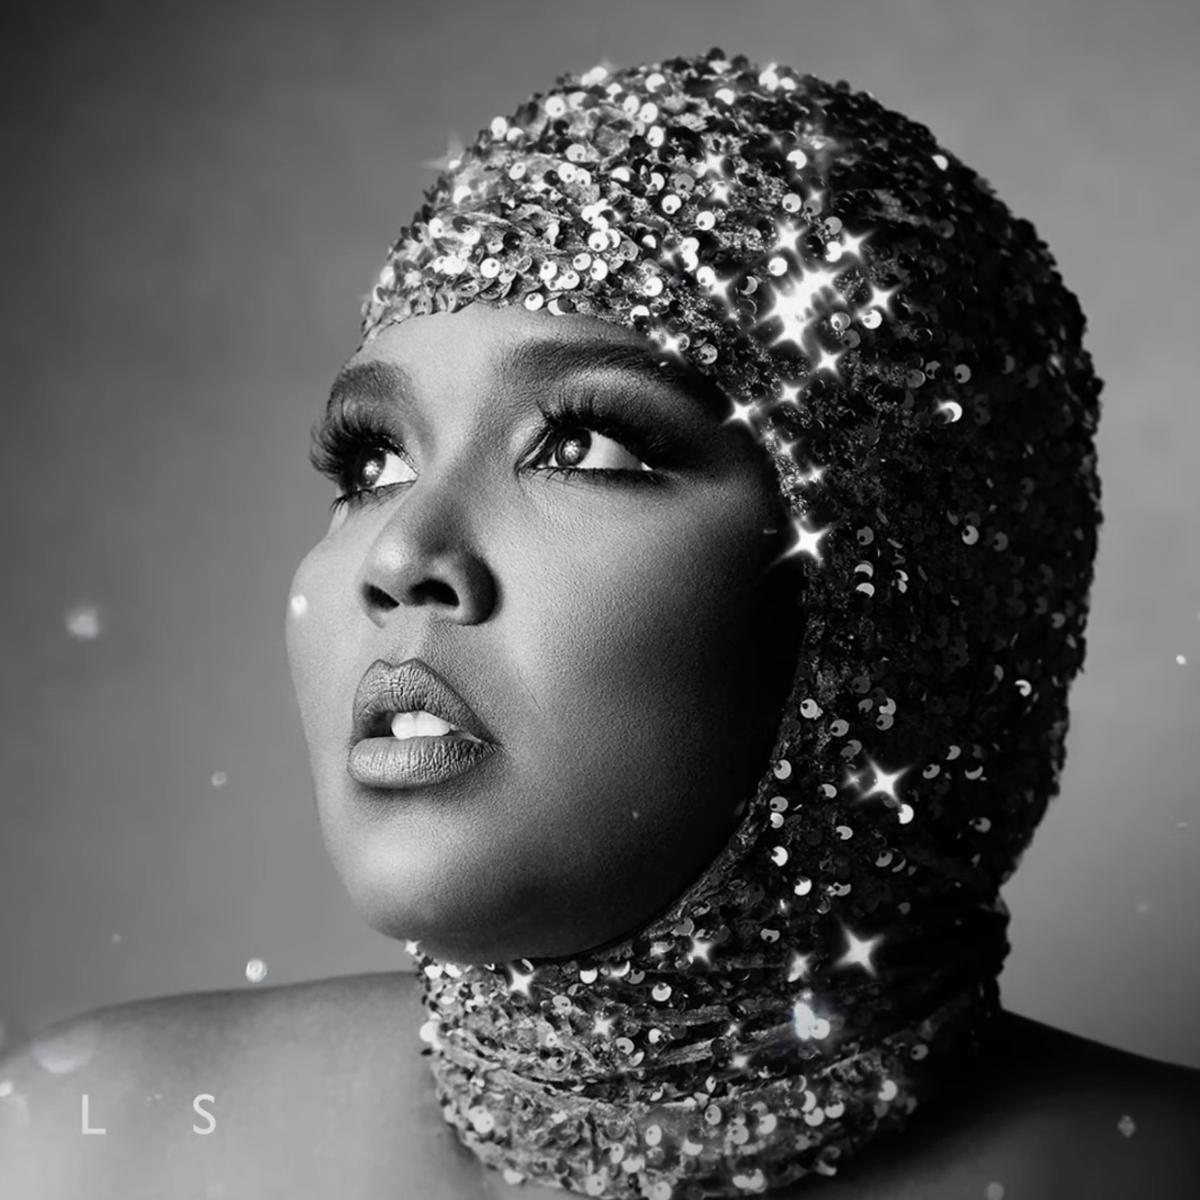 Lizzo Hypes Up Her “Grrrls” In New Single